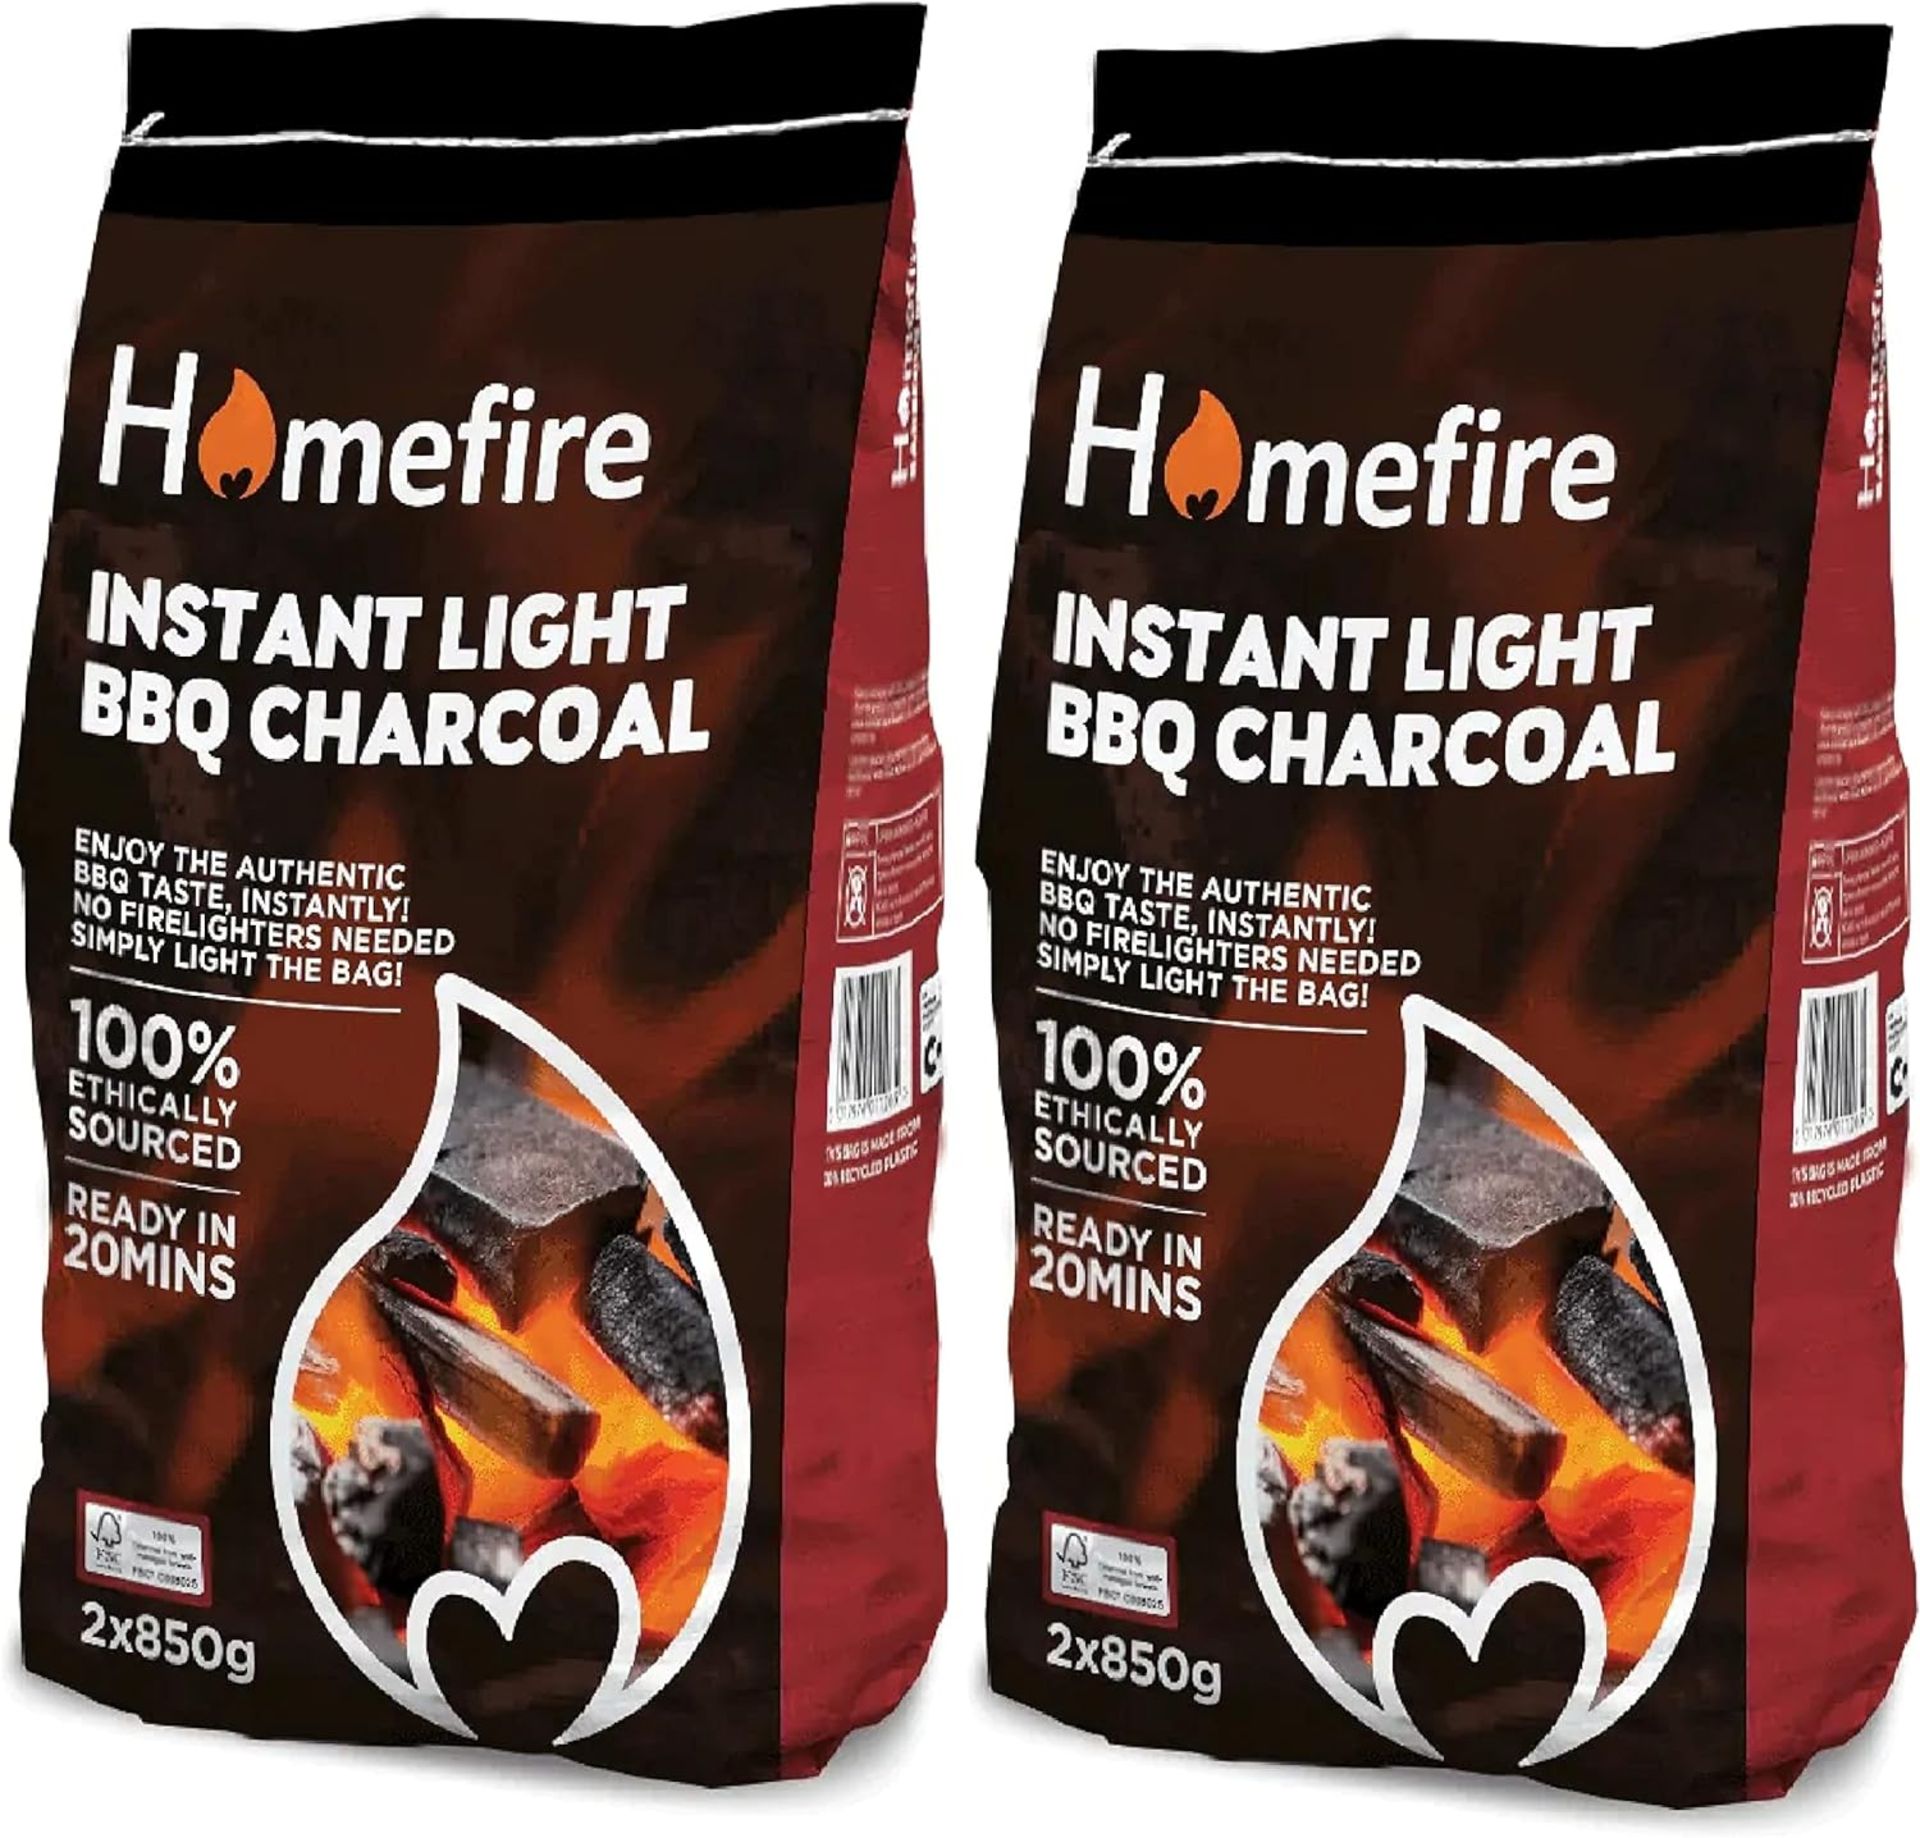 20 X BRAND NEW 2 X 850G BAGS OF HOMEFIRE INSTANT LIGHT BBQ CHARCOAL R5.2